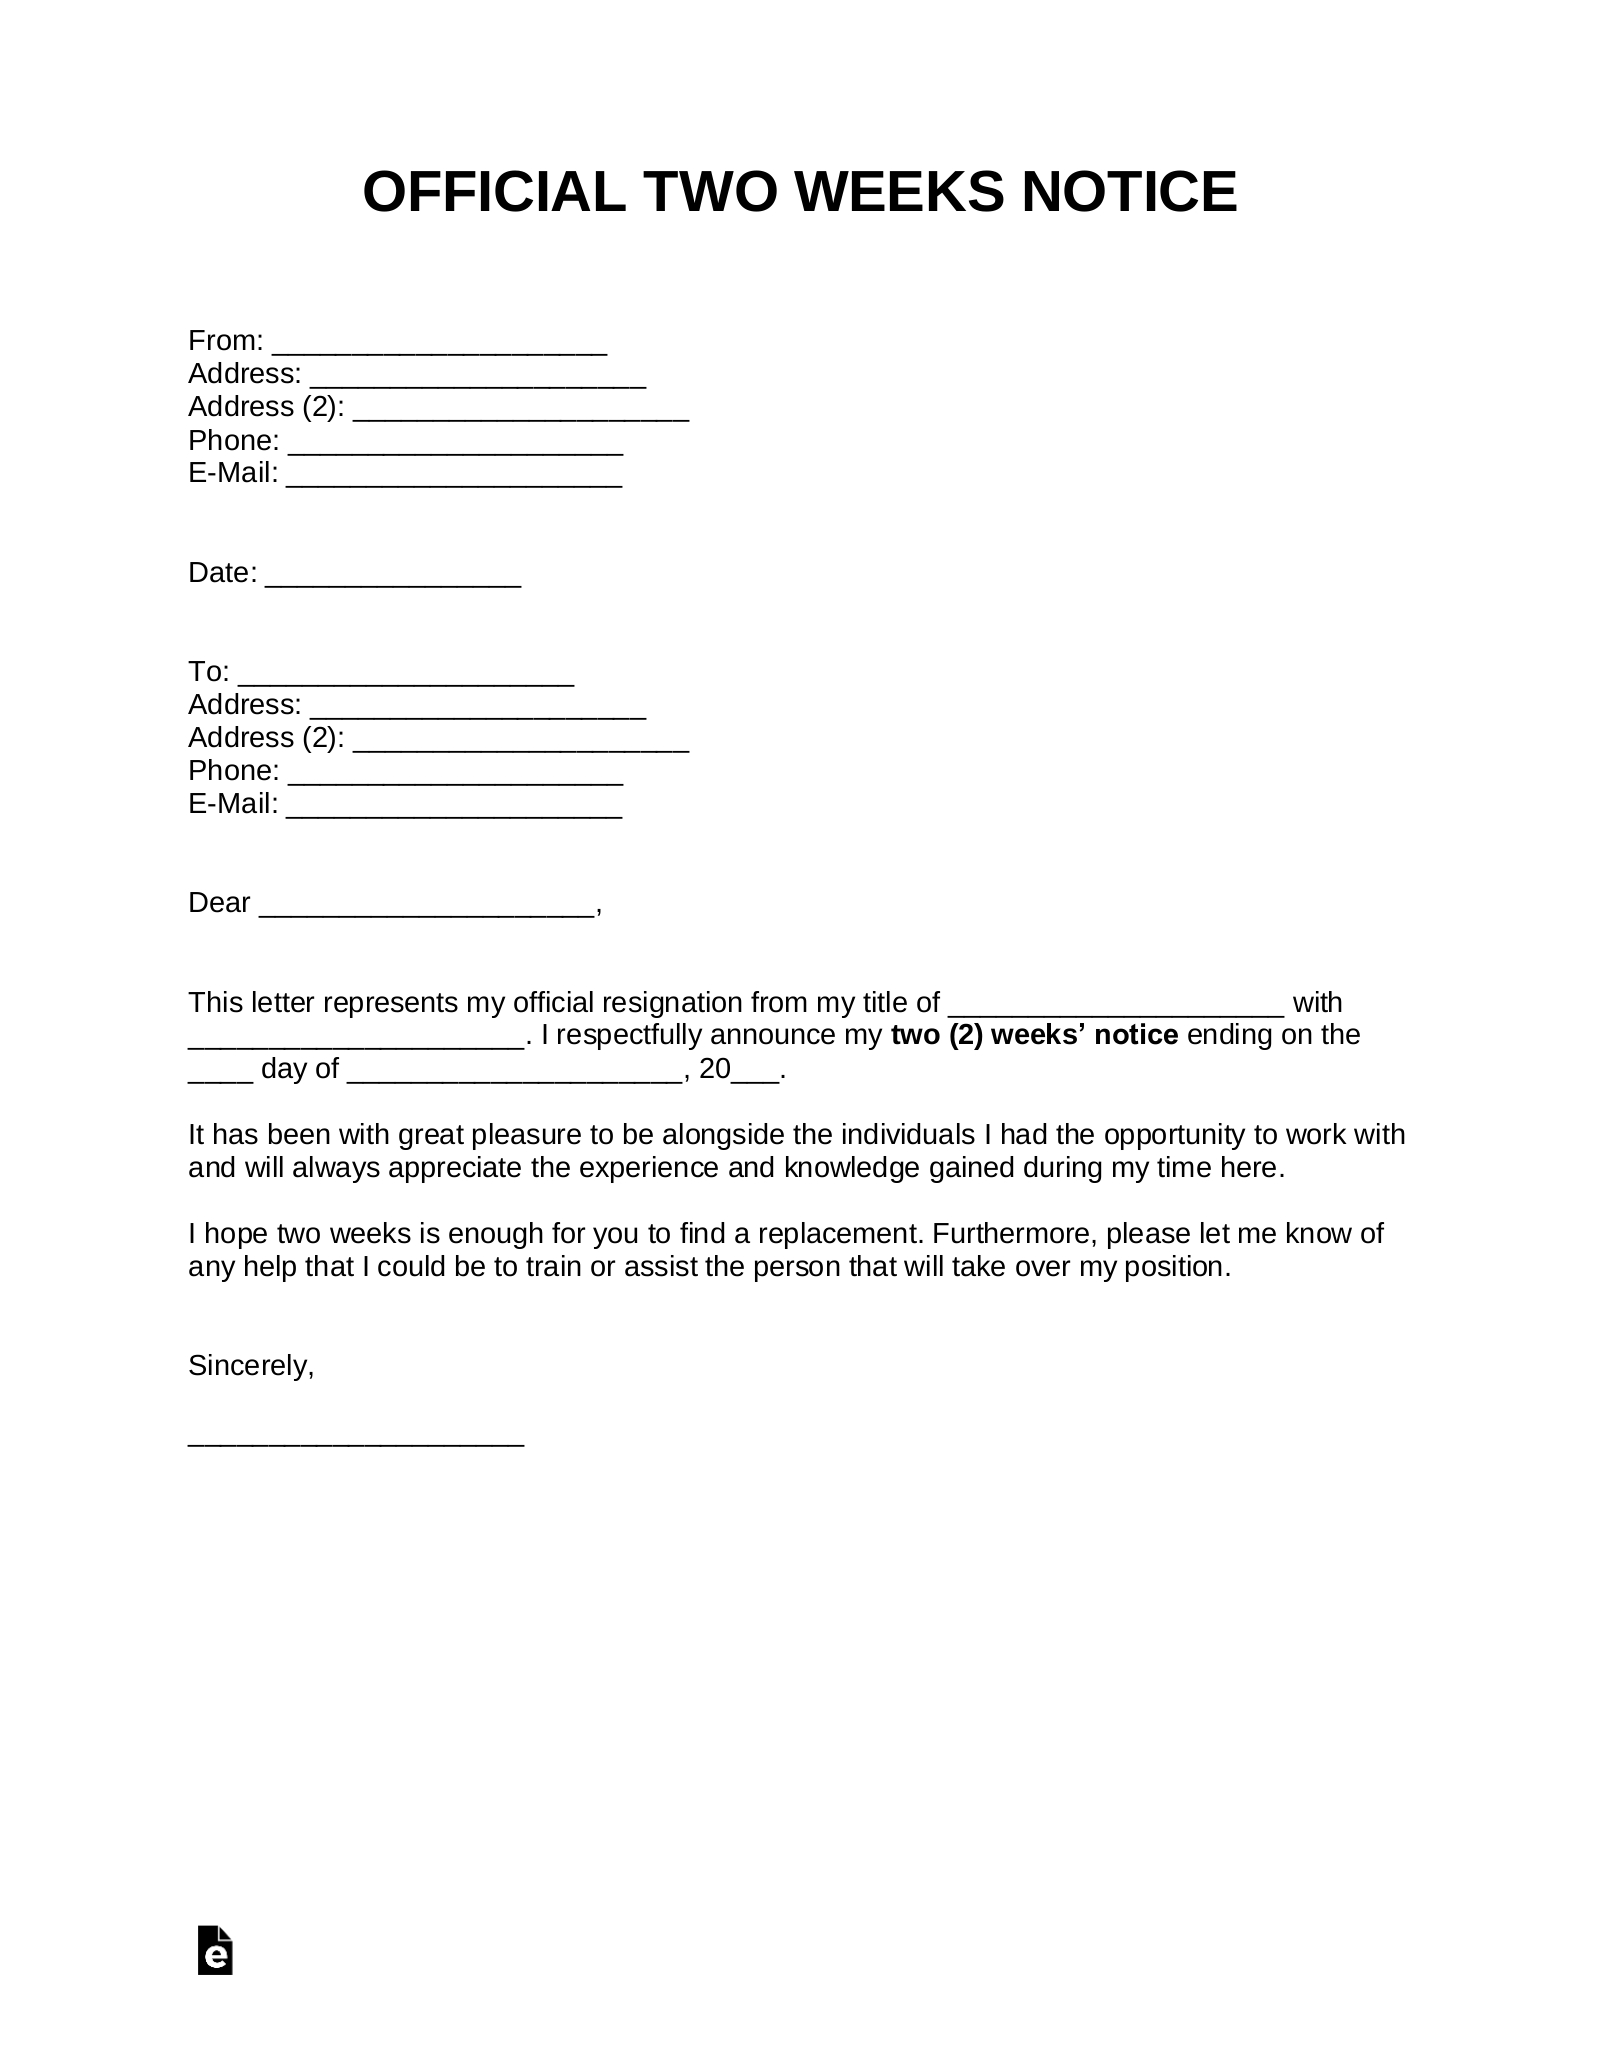 Free Two Weeks Notice Letter | Templates & Samples - Pdf Throughout Two Week Notice Template Word